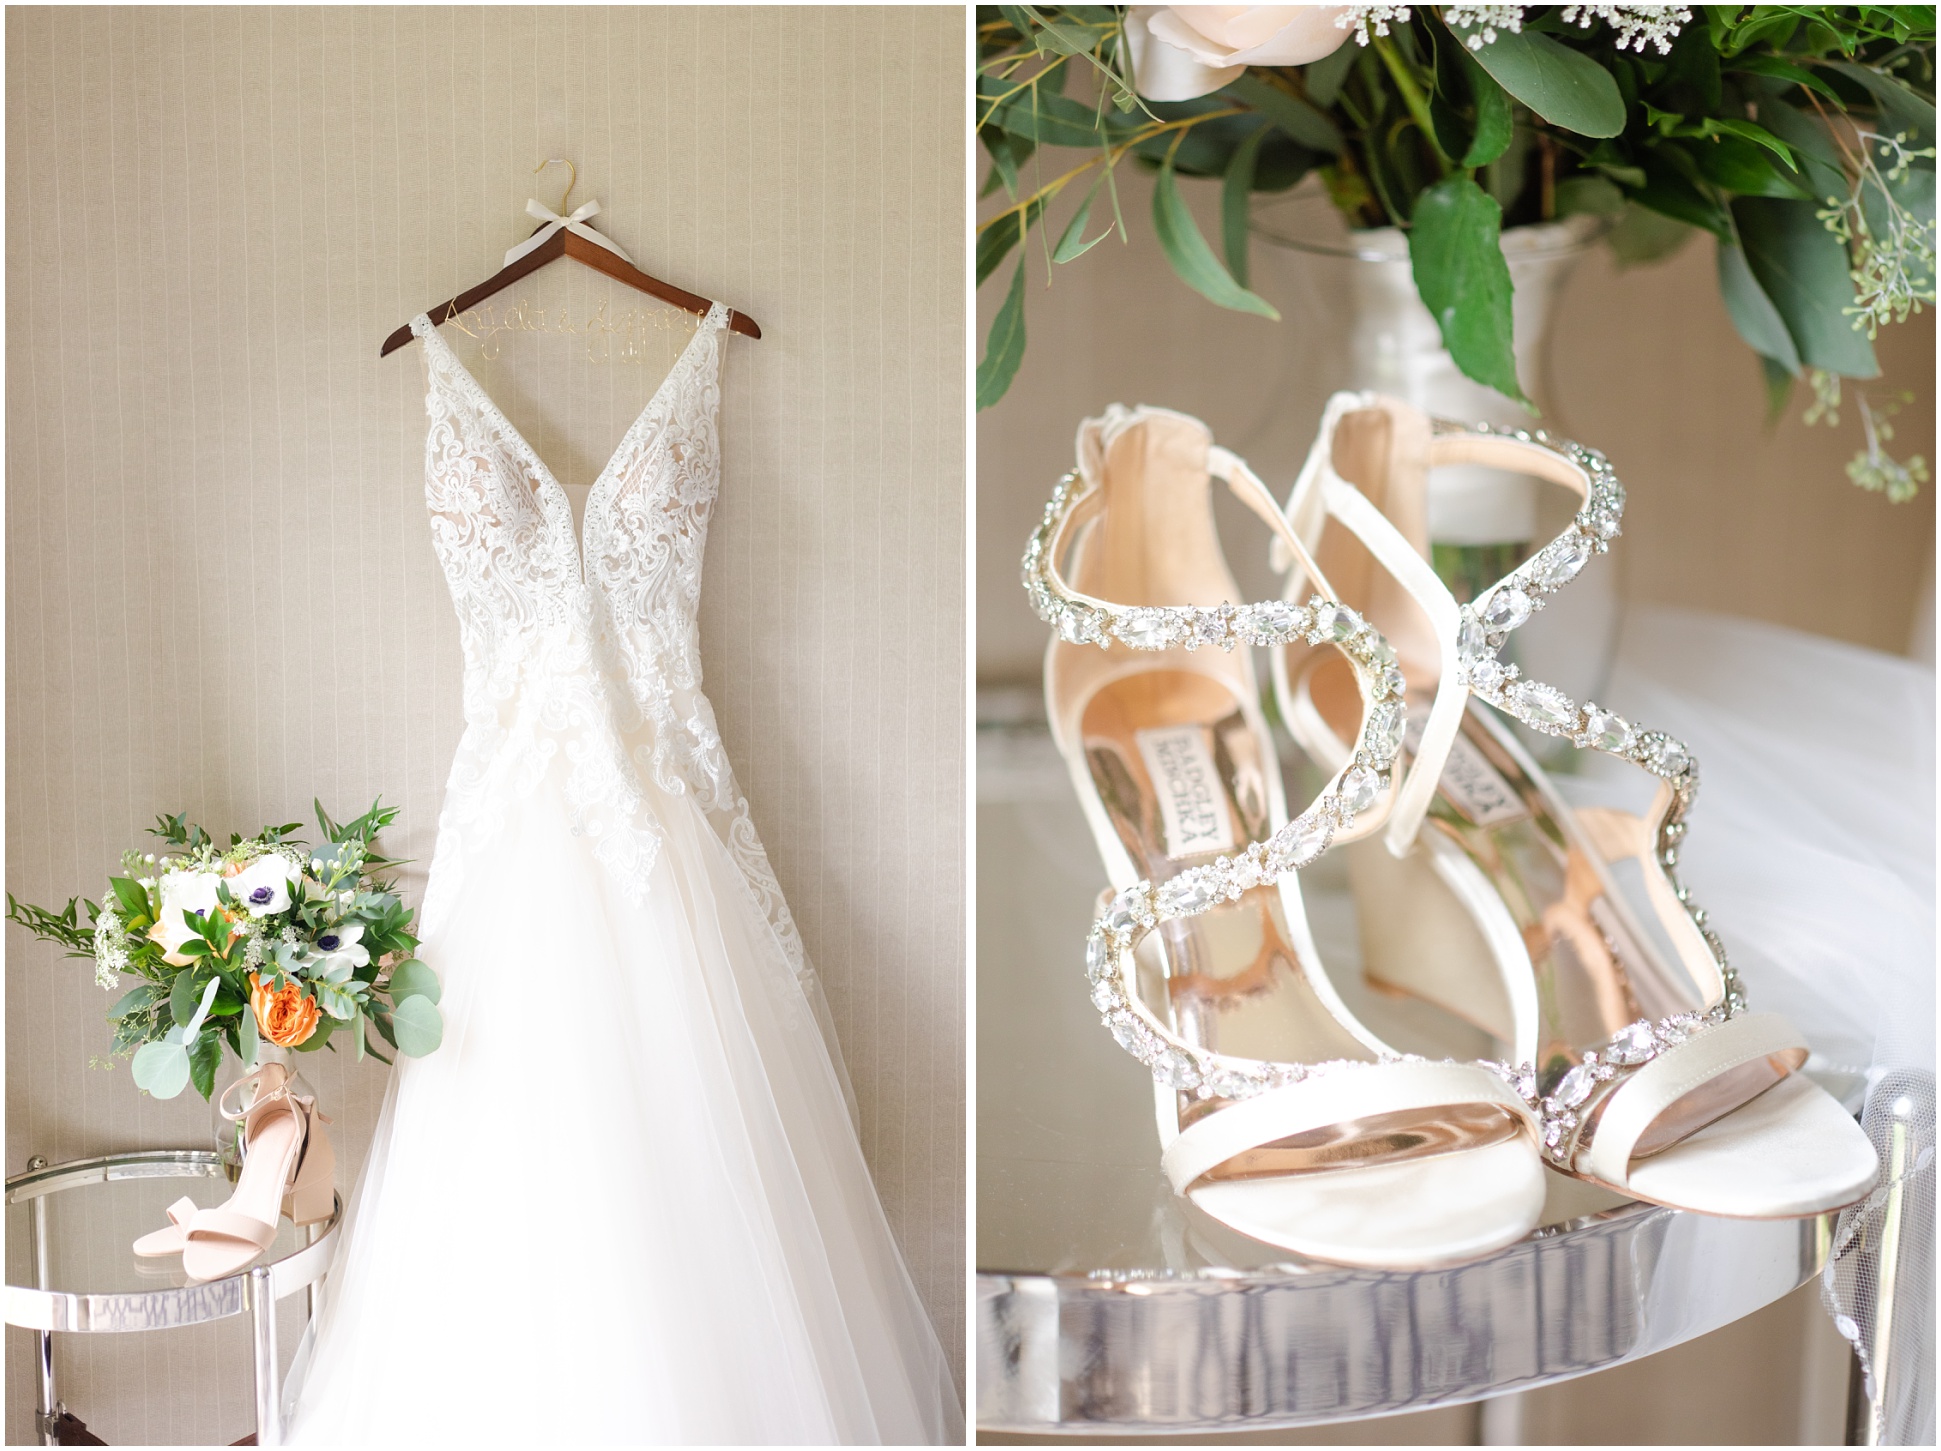 Left: Dress hanging with bouquet on a table, right: brides wedding shoes